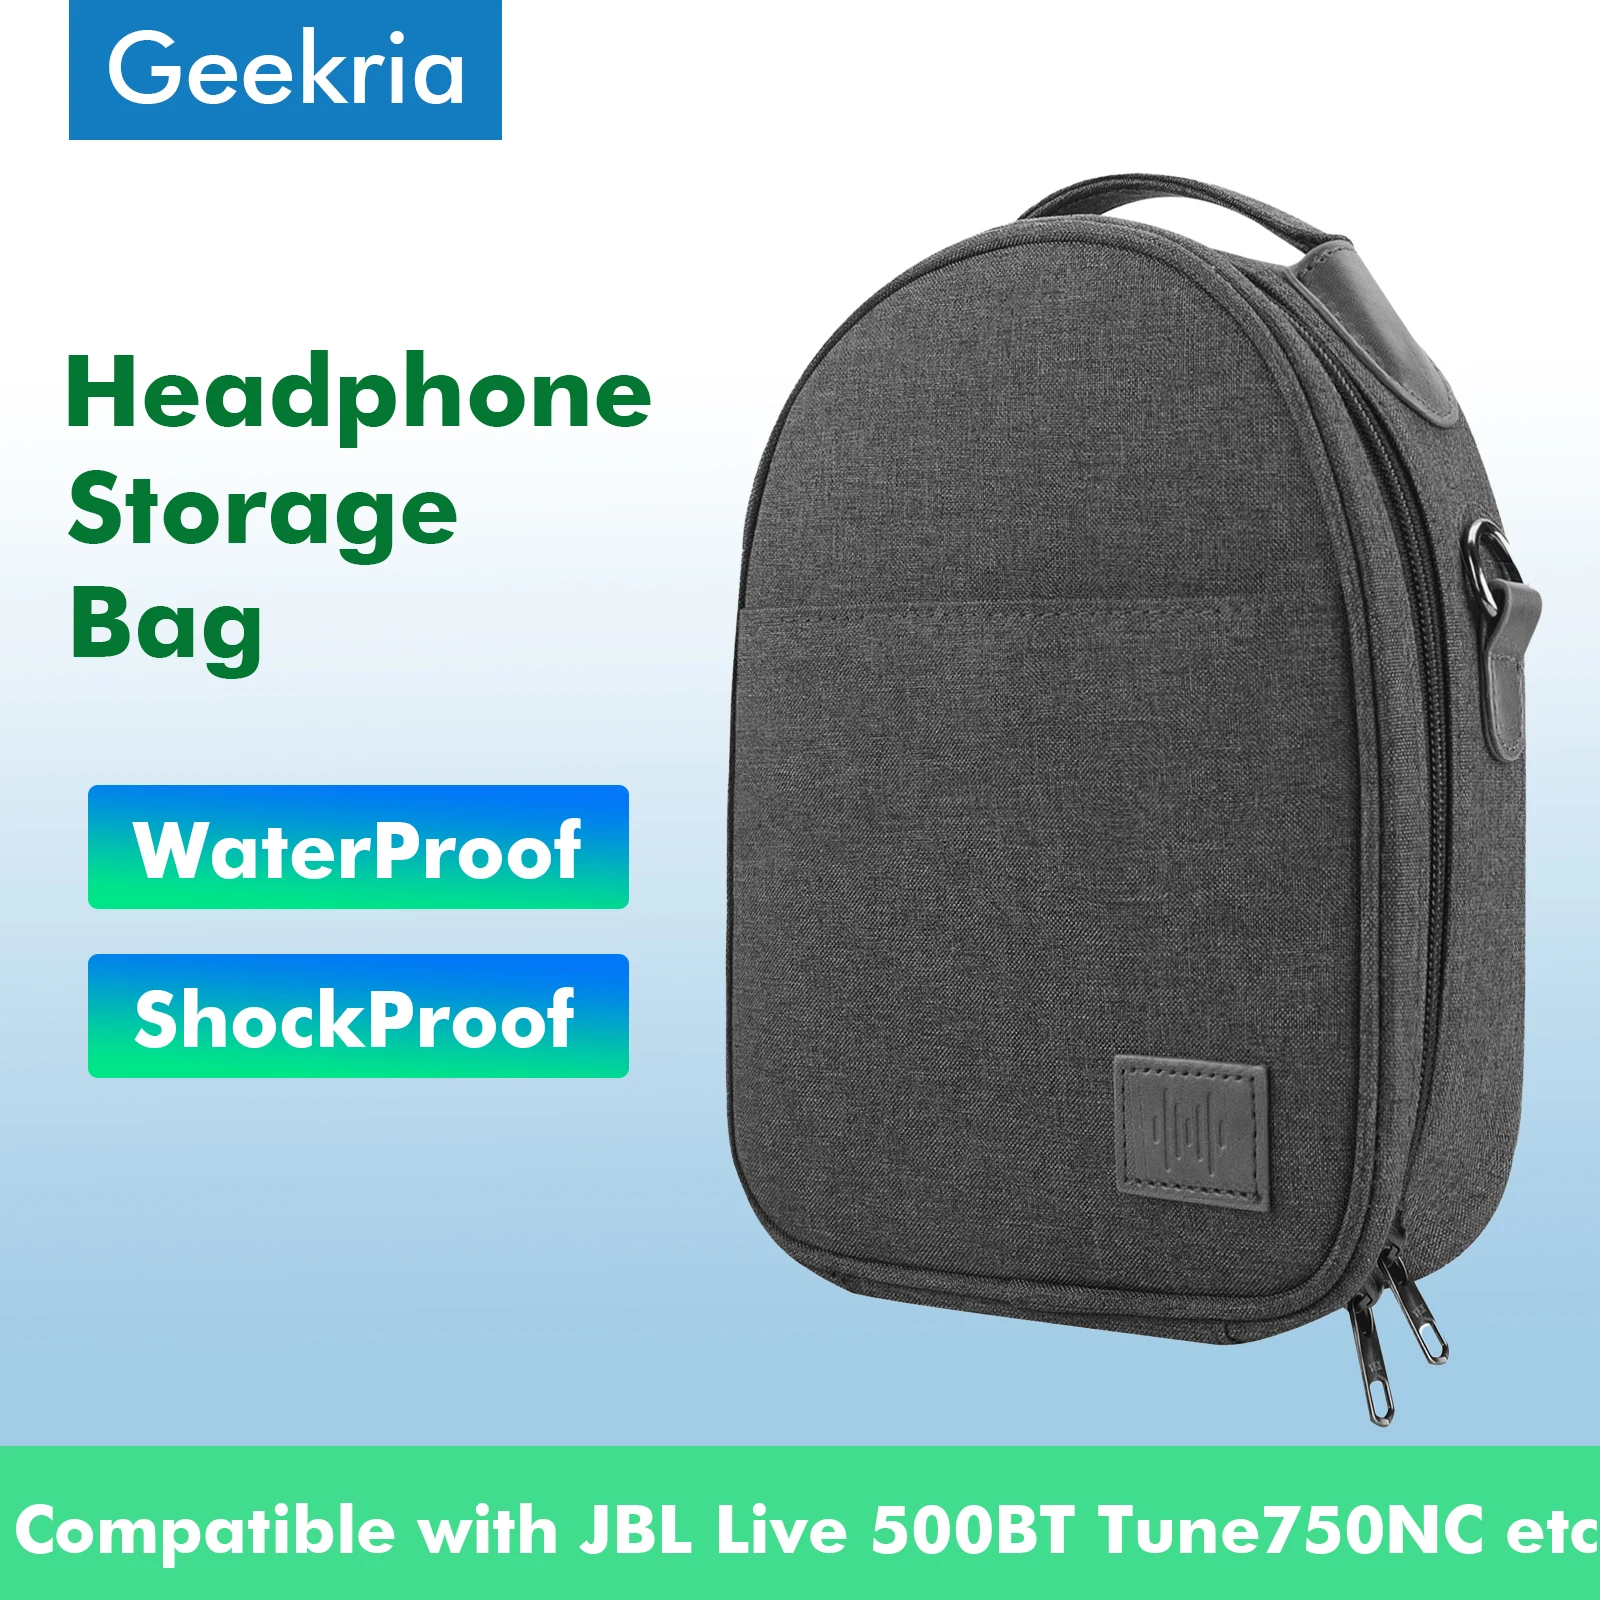 

Geekria Headphones Case For JBL Live 500BT E55BT Tune750NC Hard Portable Bluetooth Earphones Headset Bag For Accessories Storage